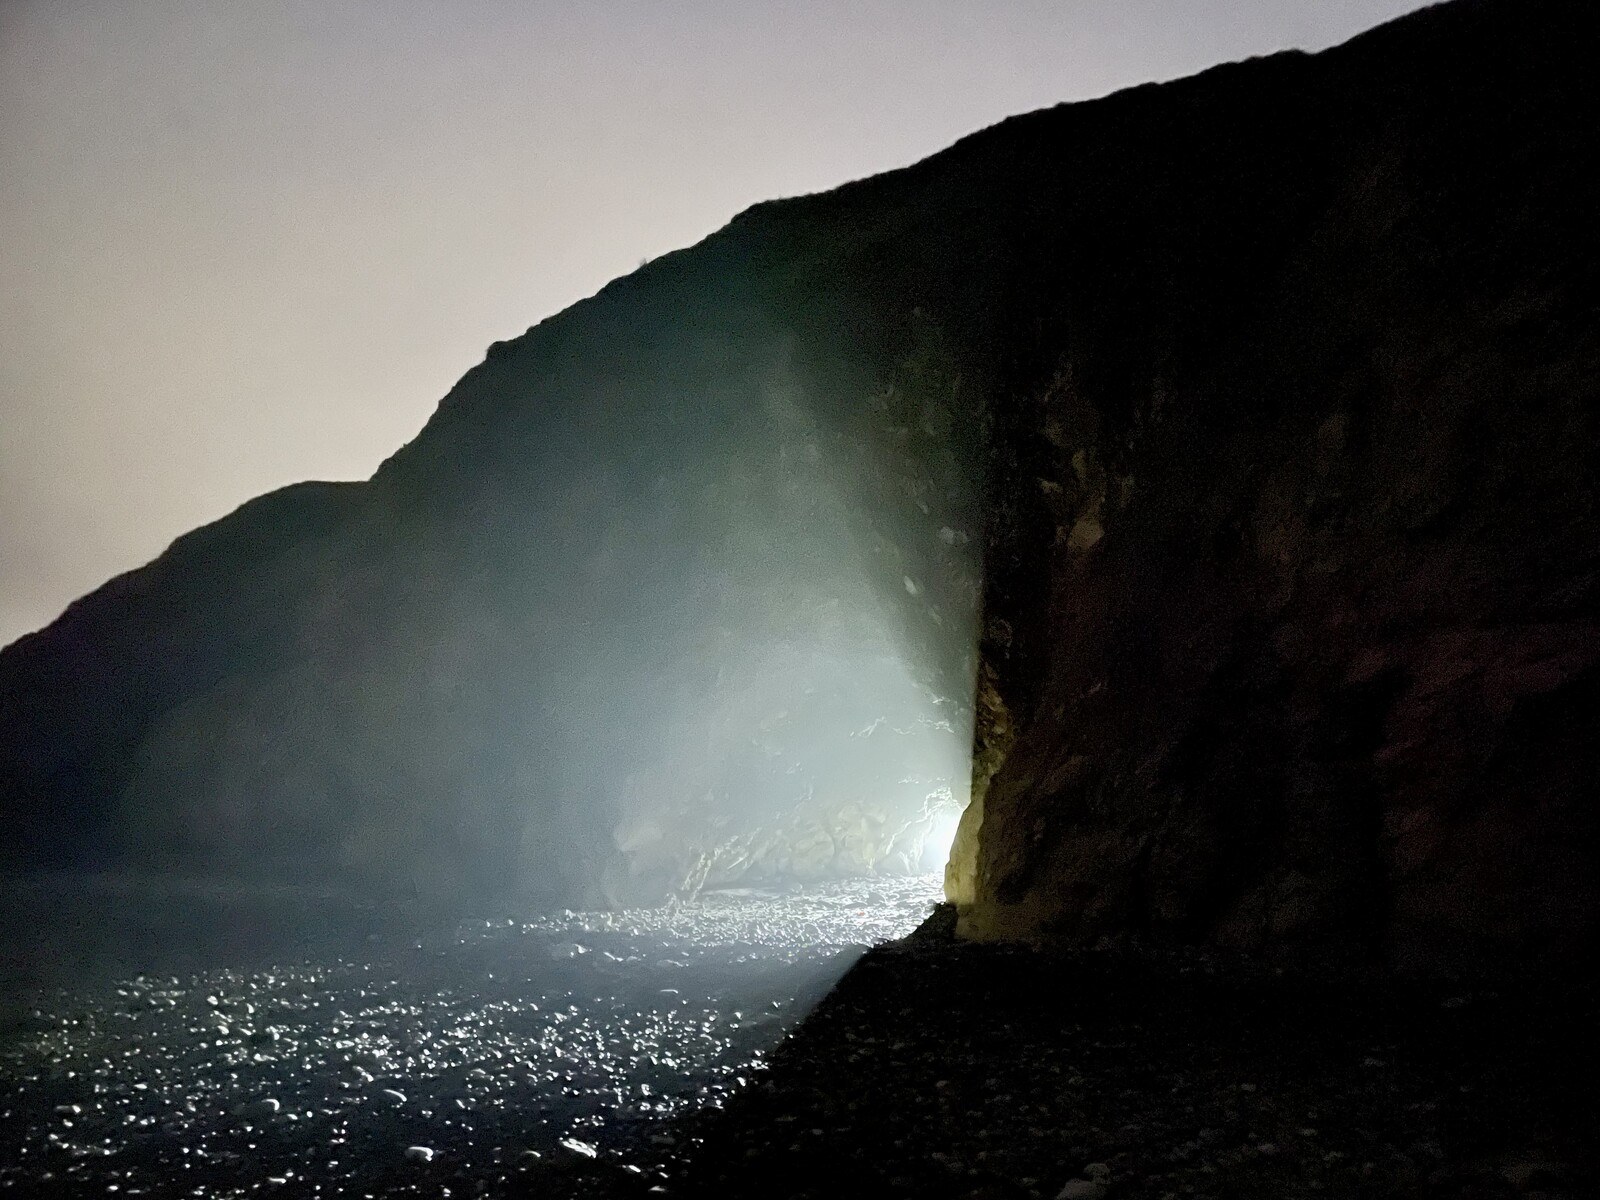 Light shining out of a cave in the dark at Blackhall Rocks